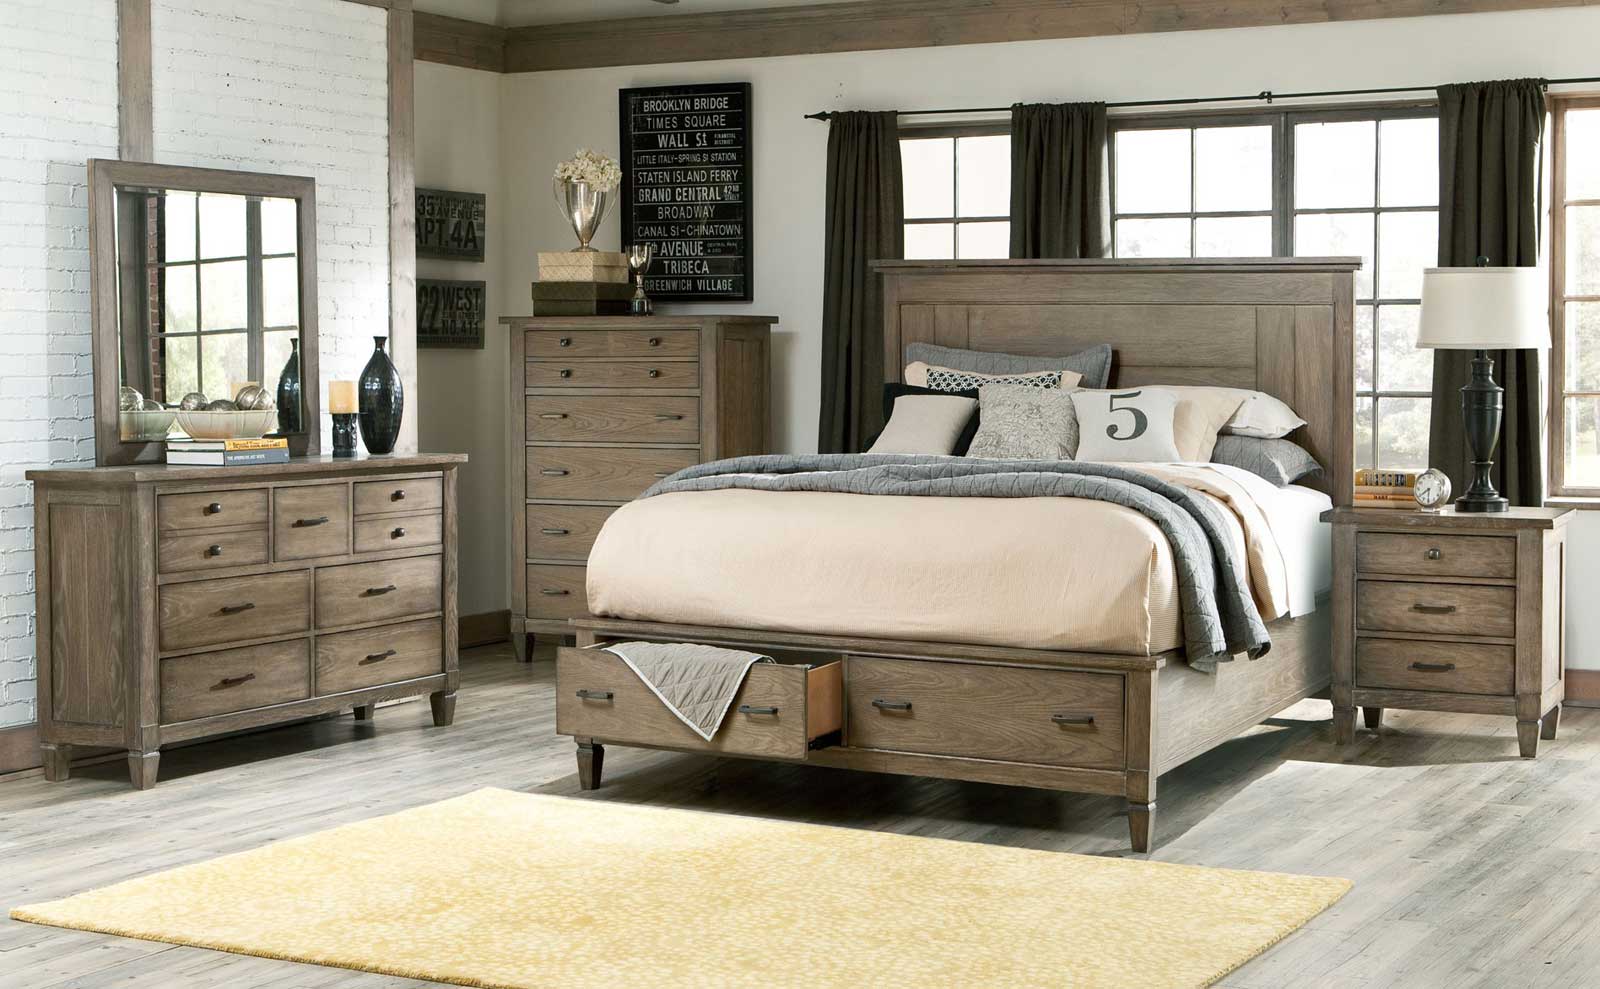 King Bedroom Small Relaxing King Bedroom Sets For Small Apartment Design Ideas With Calm Teak Wooden Bedroom Storage Design And Astonishing Laminate Wood Flooring Design Also Cheerful Pastel Gray Bed Spread Ideas Bedroom Enhance The King Bedroom Sets: The Soft Vineyard-6